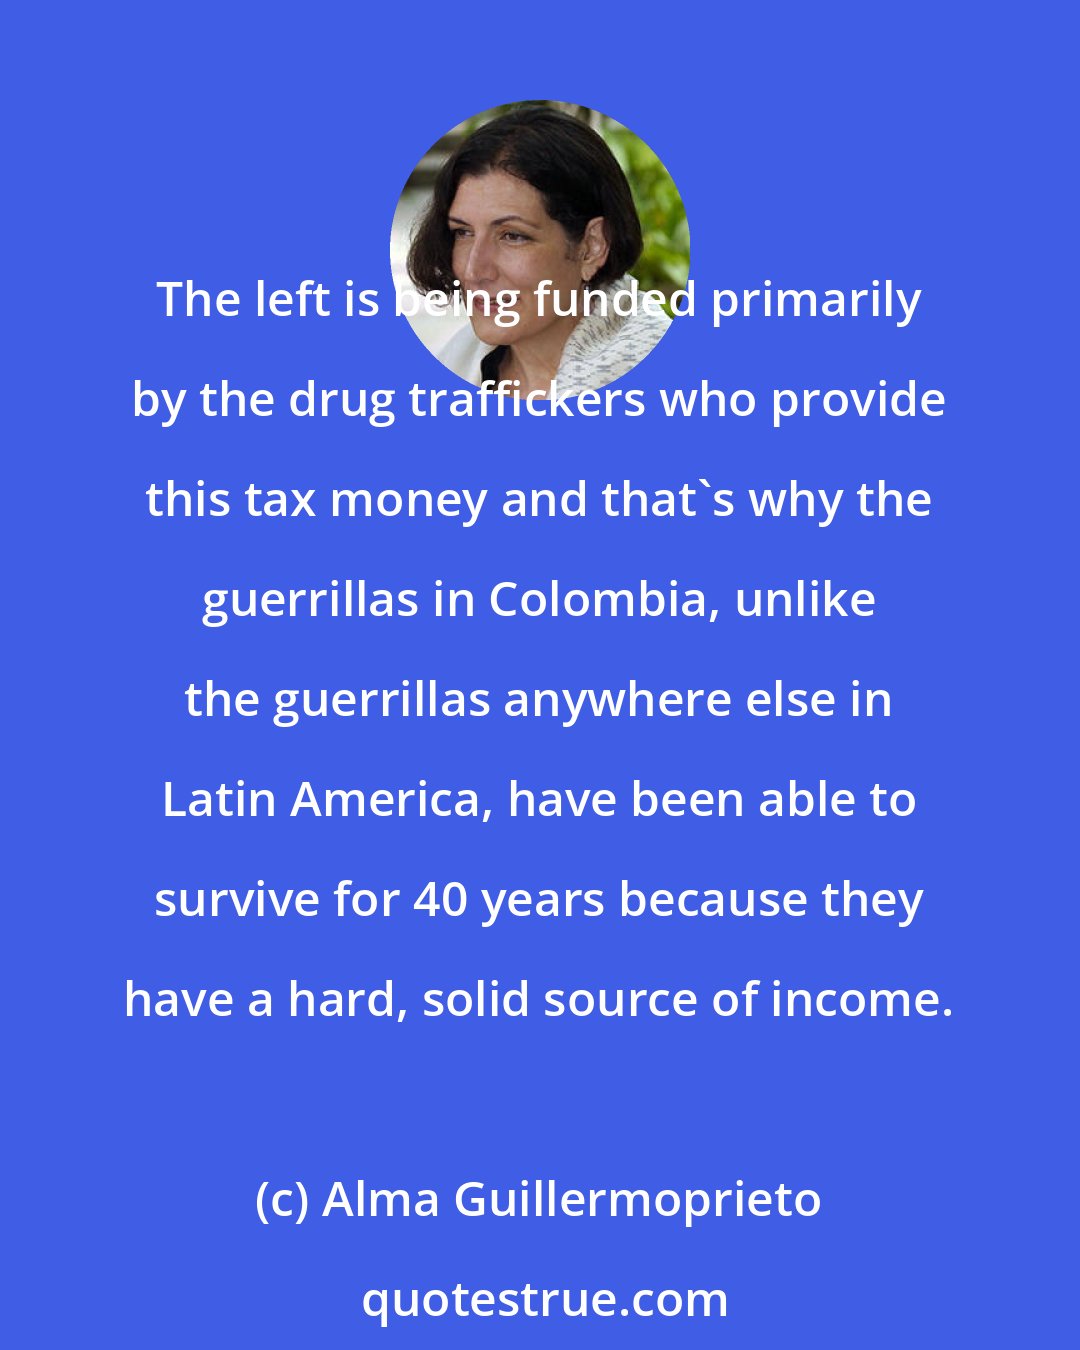 Alma Guillermoprieto: The left is being funded primarily by the drug traffickers who provide this tax money and that's why the guerrillas in Colombia, unlike the guerrillas anywhere else in Latin America, have been able to survive for 40 years because they have a hard, solid source of income.